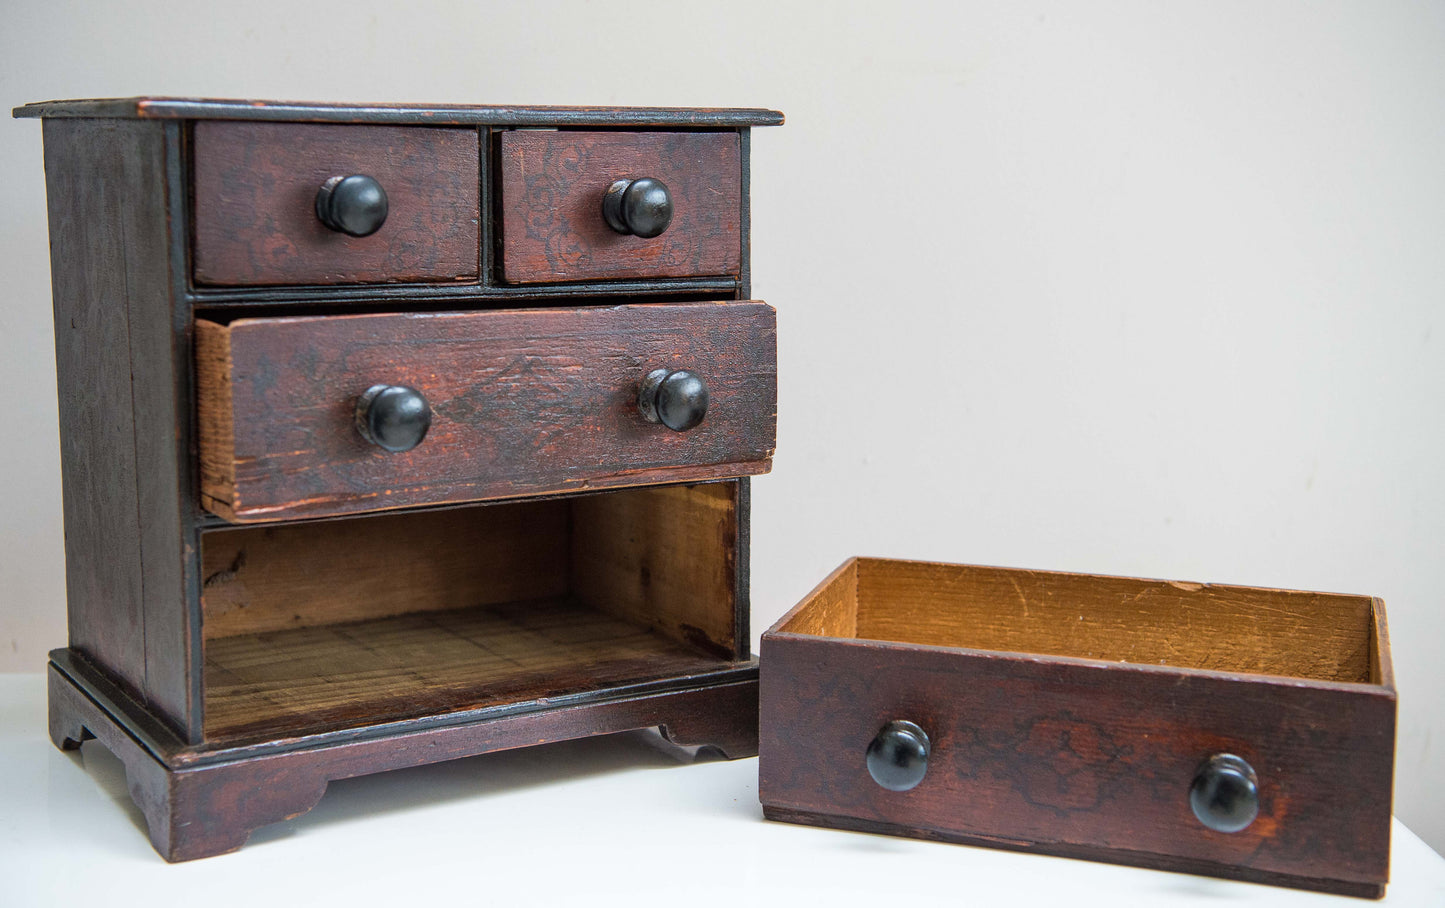 Miniature or apprentice pine chest of drawers, dating from the late 19th Century